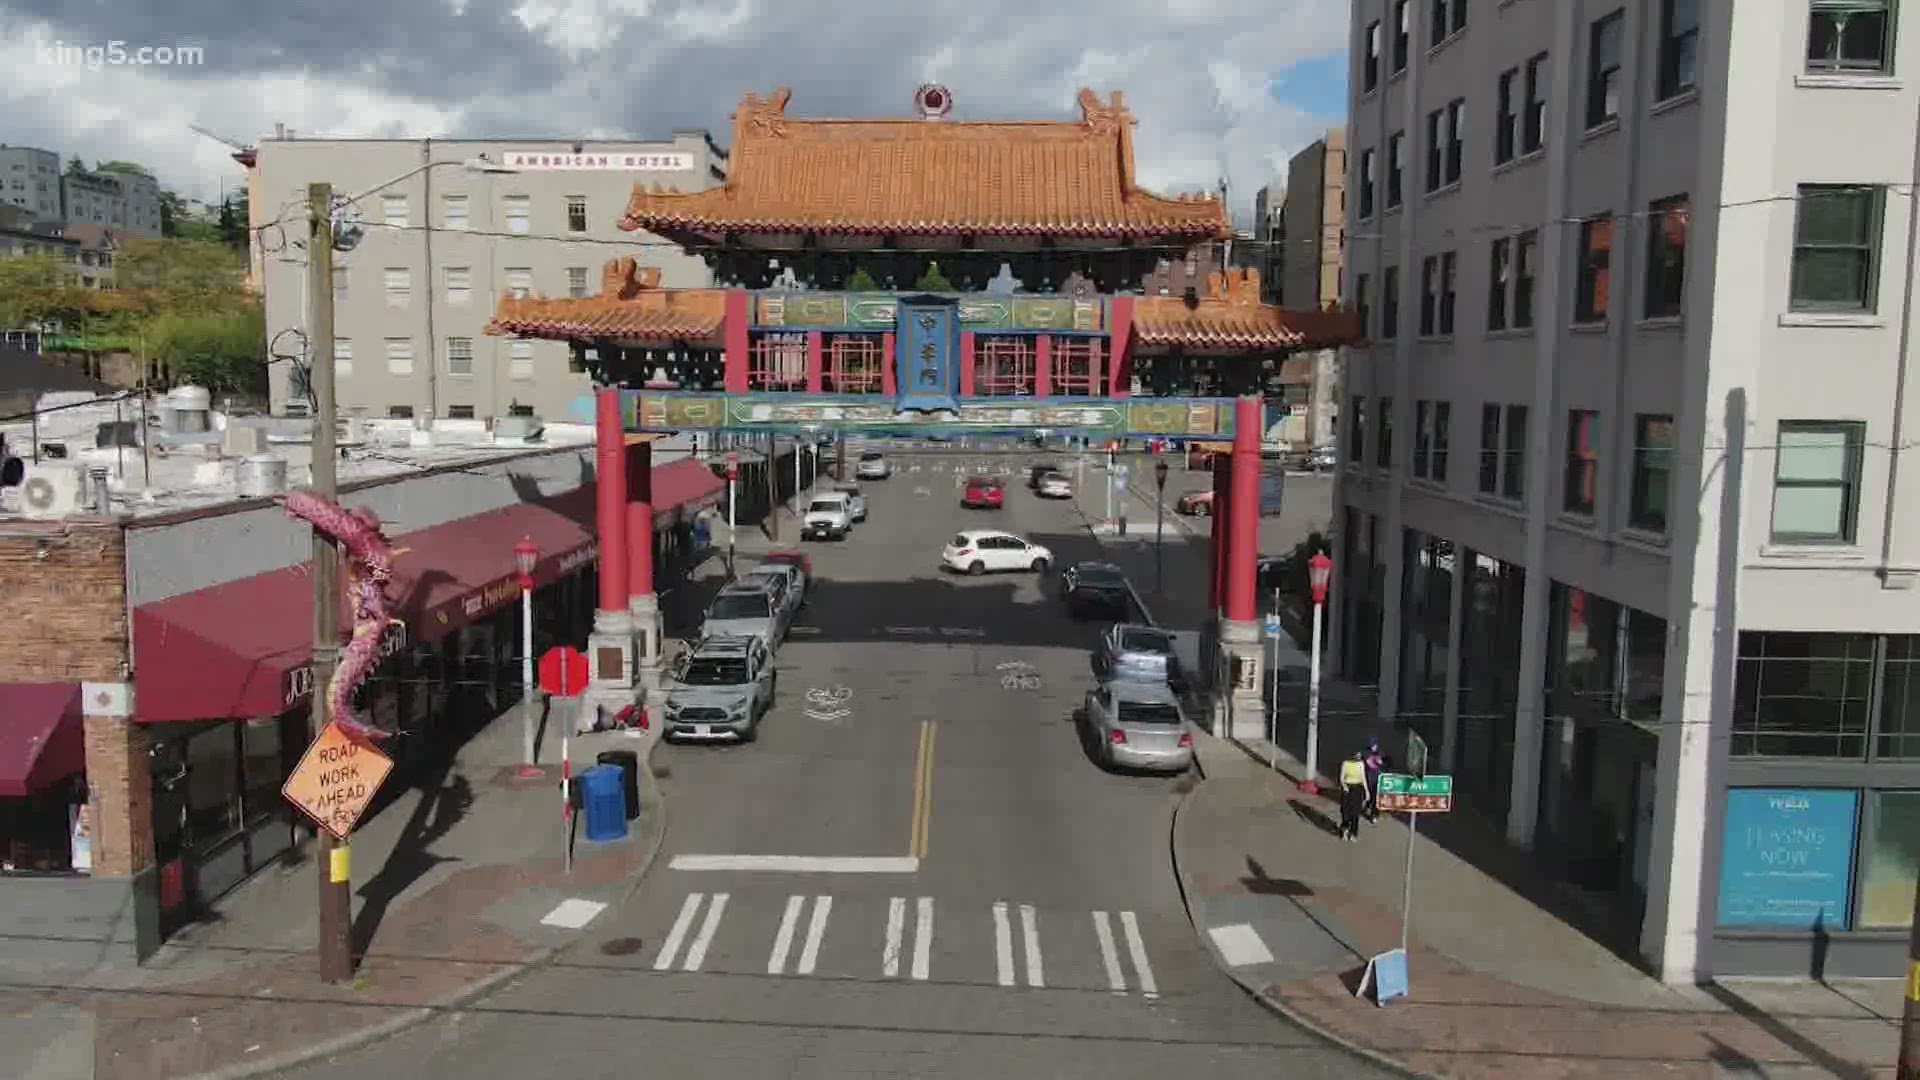 A private security company is watching the streets of Chinatown-ID for free after several small businesses were targeted in recent weeks.